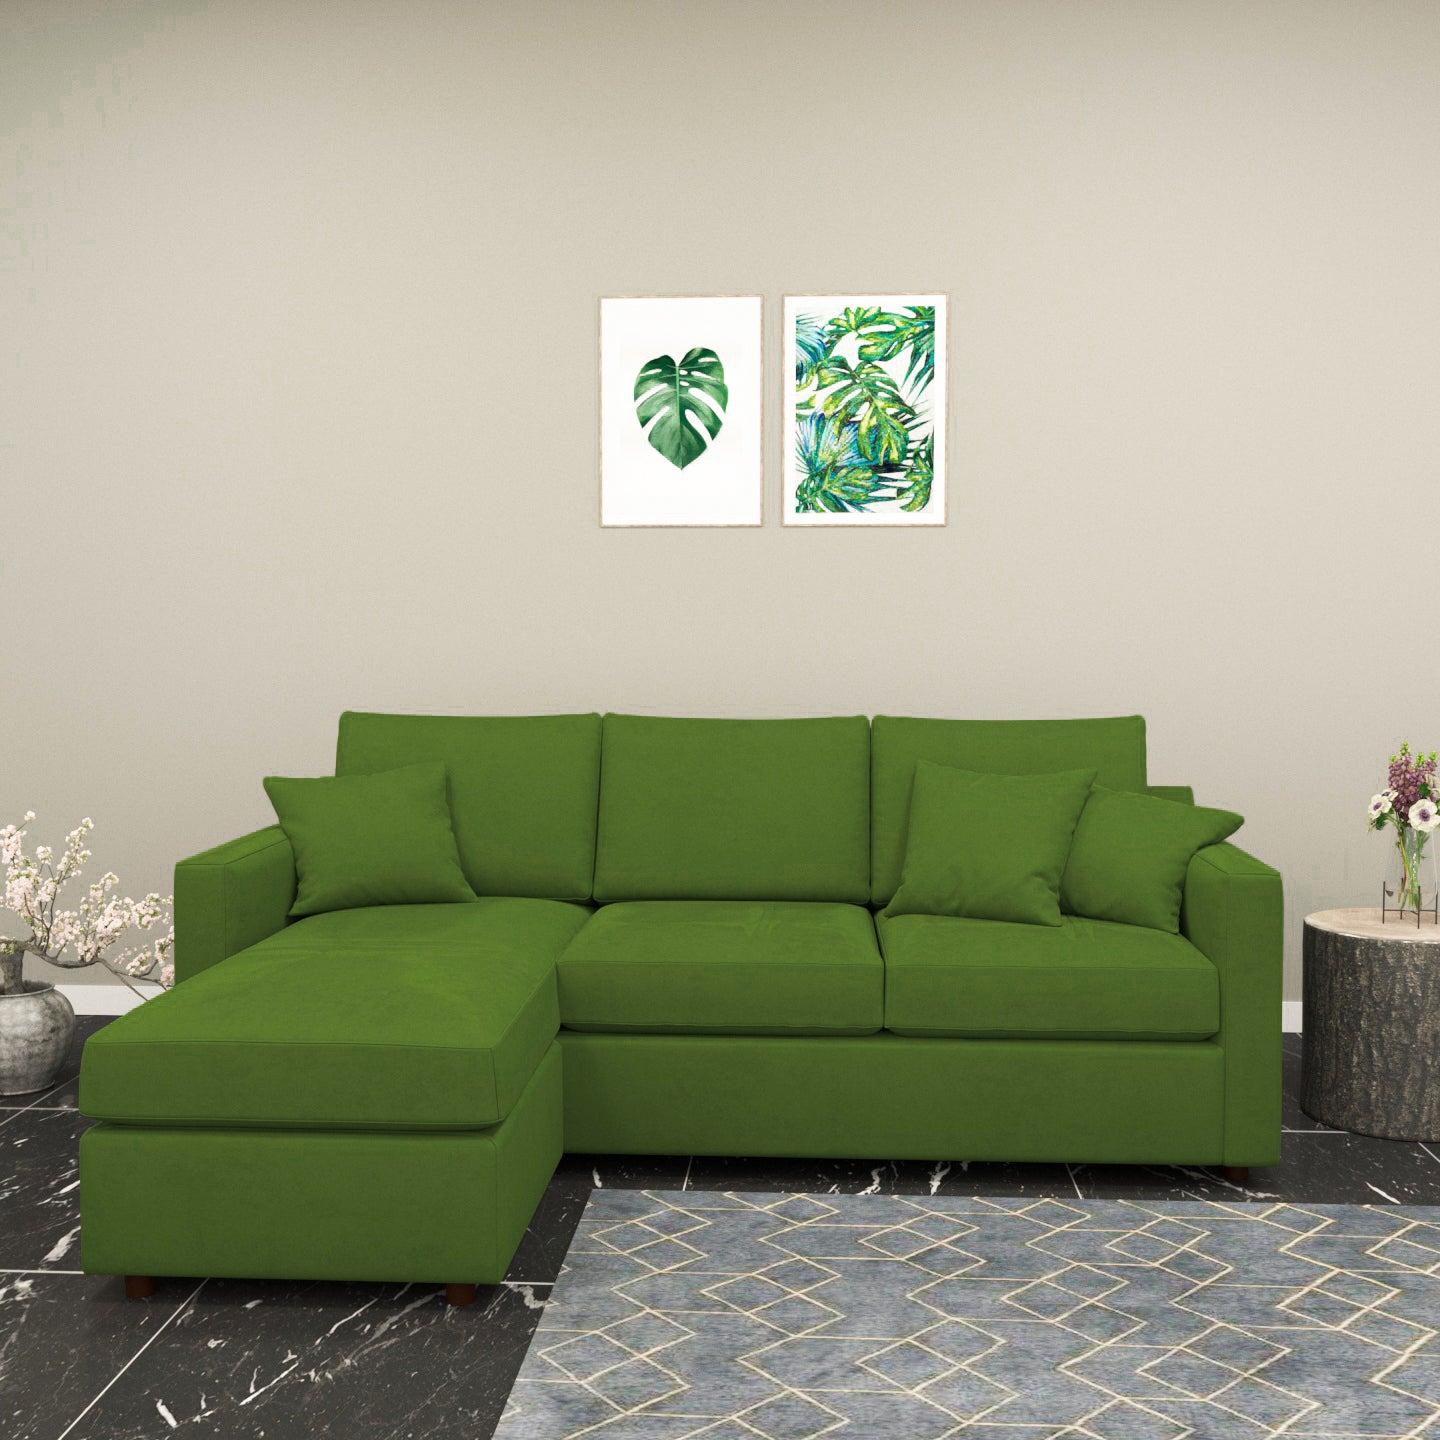 Garden Green Coloured with Premium Comfort L Shaped 4 Seater Sofa Set for Home Sofa